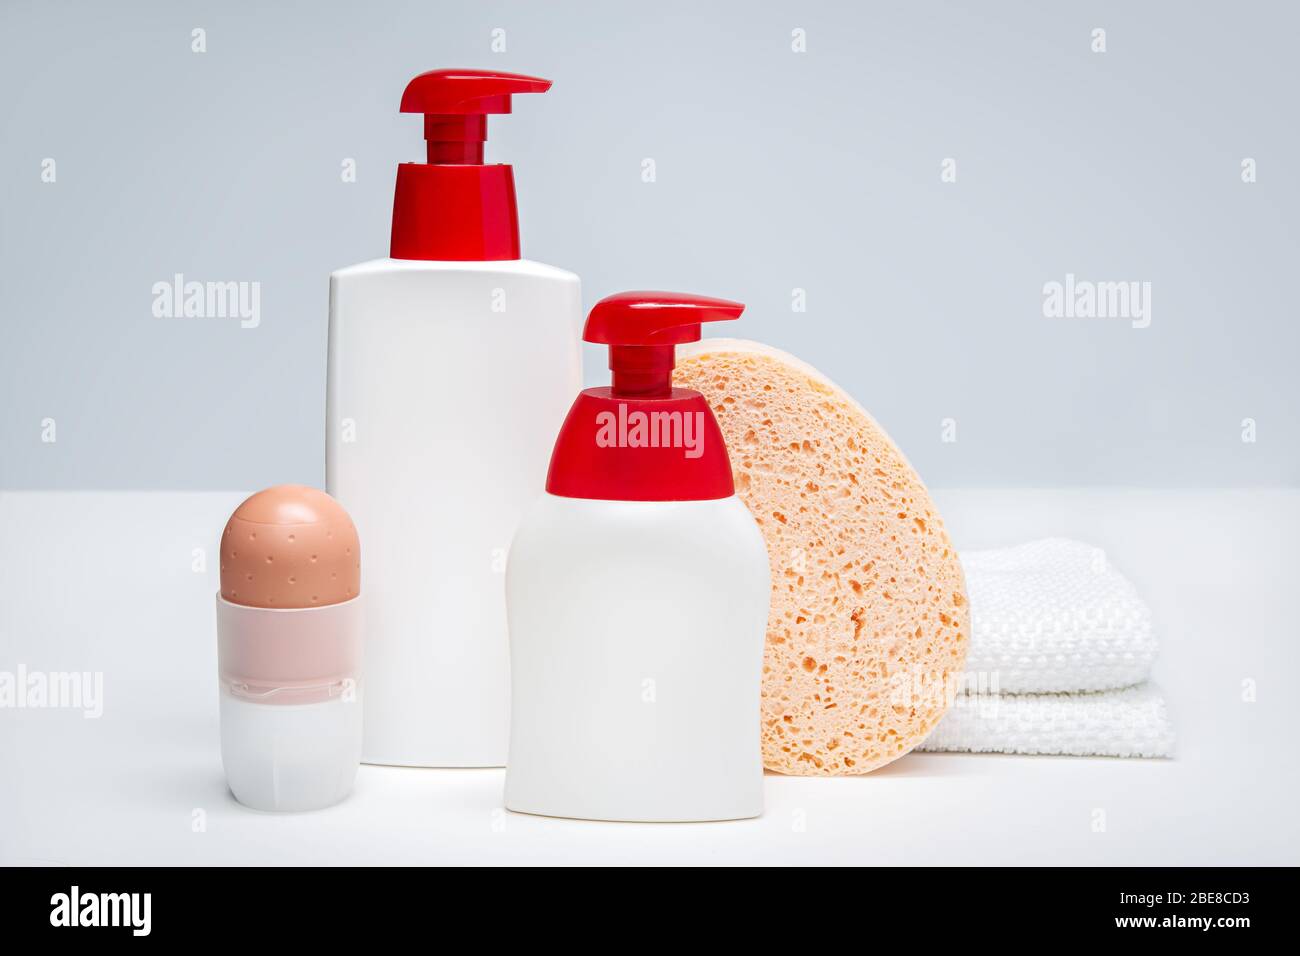 Set of body care products. Body hygiene concept. Mock up Stock Photo